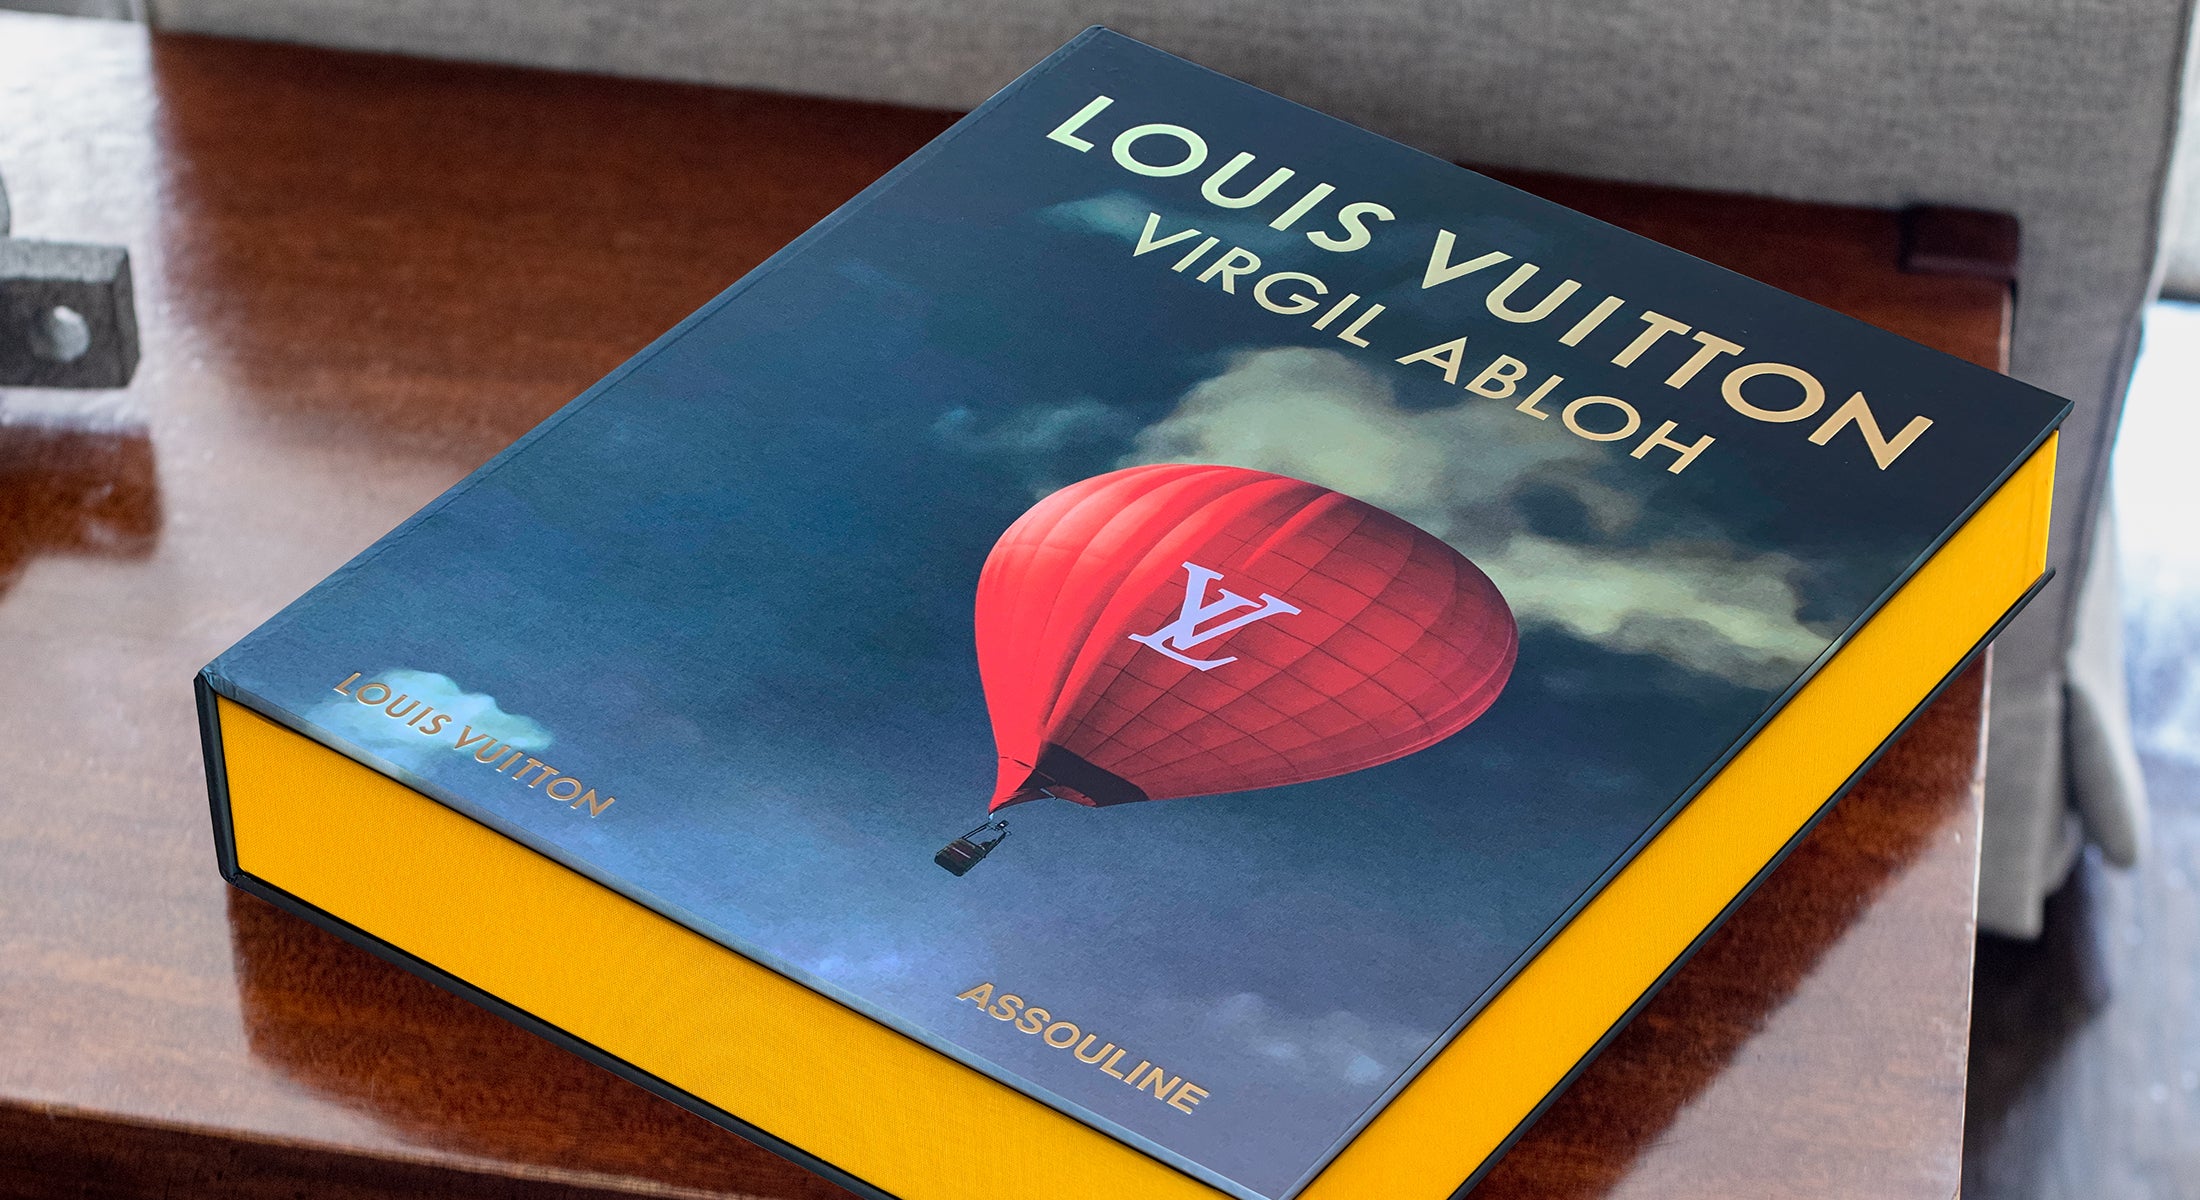 Louis Vuitton: Virgil Abloh (Ultimate Edition) Madsen, Anders Christian -  Assouline Coffee Table Book: Madsen, Anders Christian: 9781649801517:  : Books